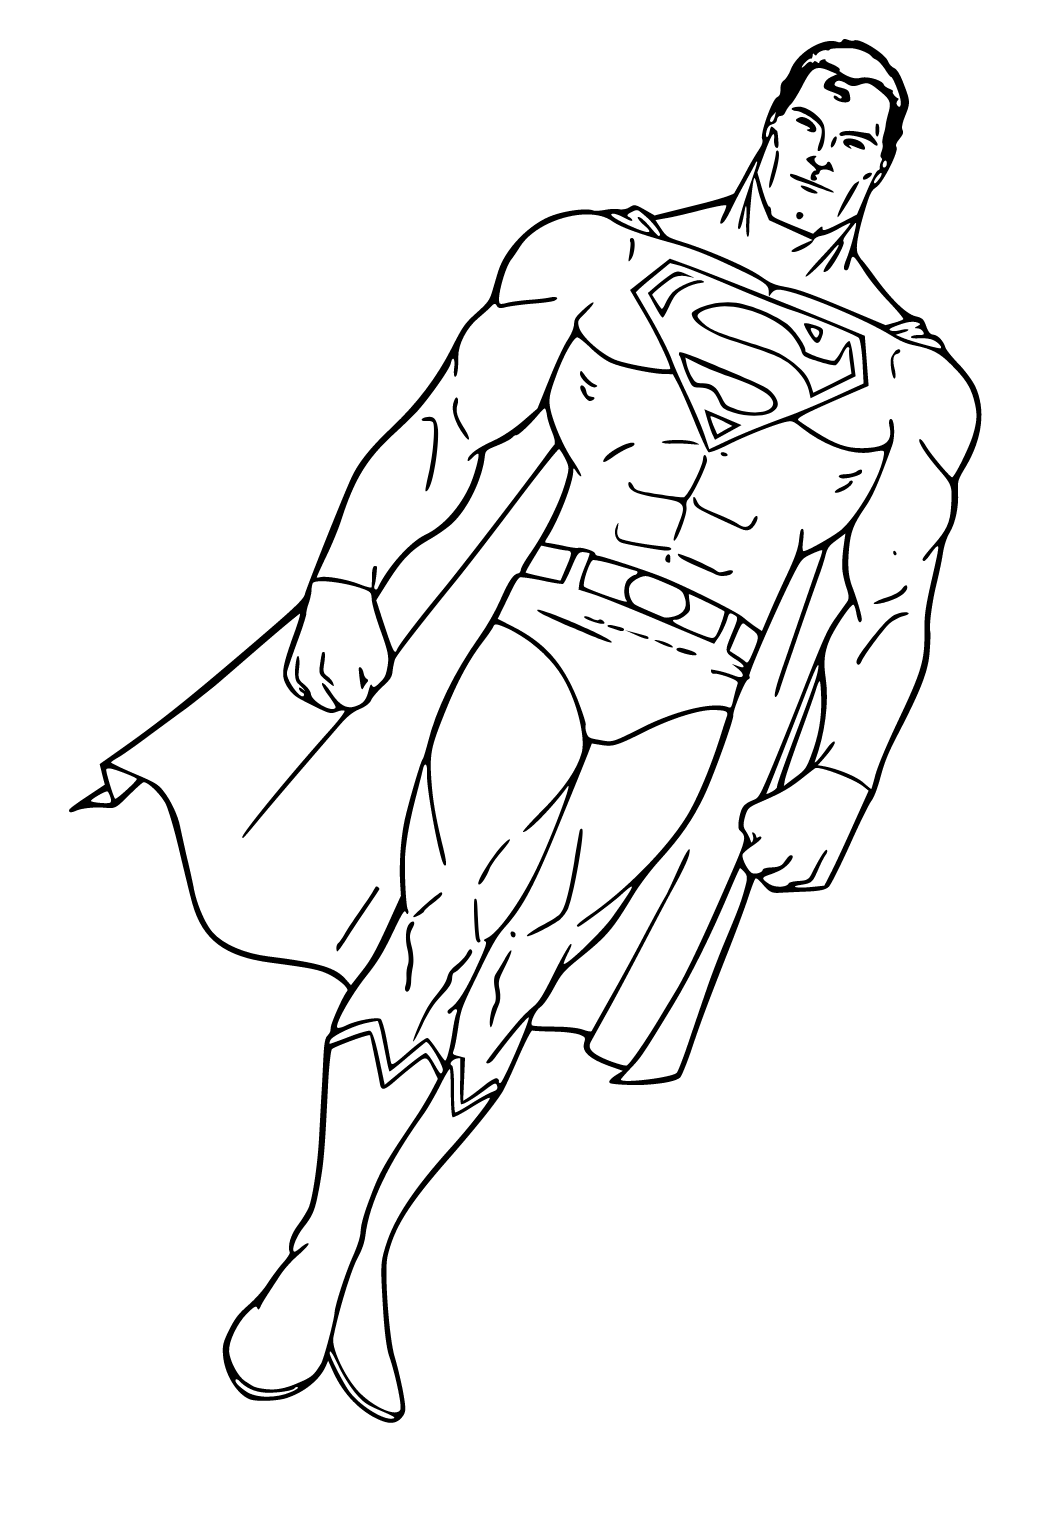 Free Printable Superman Hero Coloring Page for Adults and Kids - Lystok.com